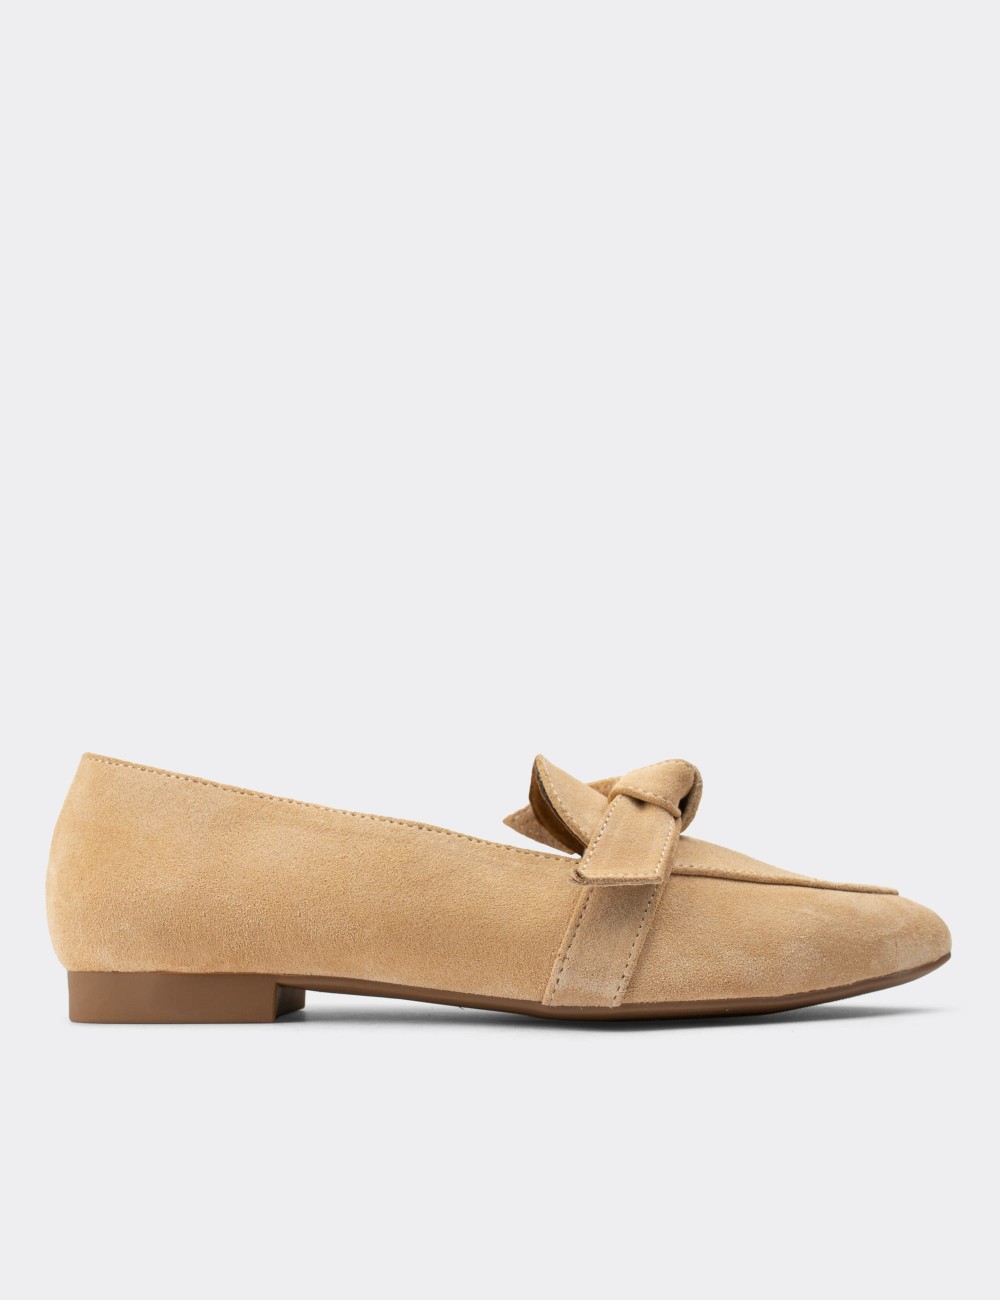 Beige Suede Leather Loafers - 01898ZBEJC01